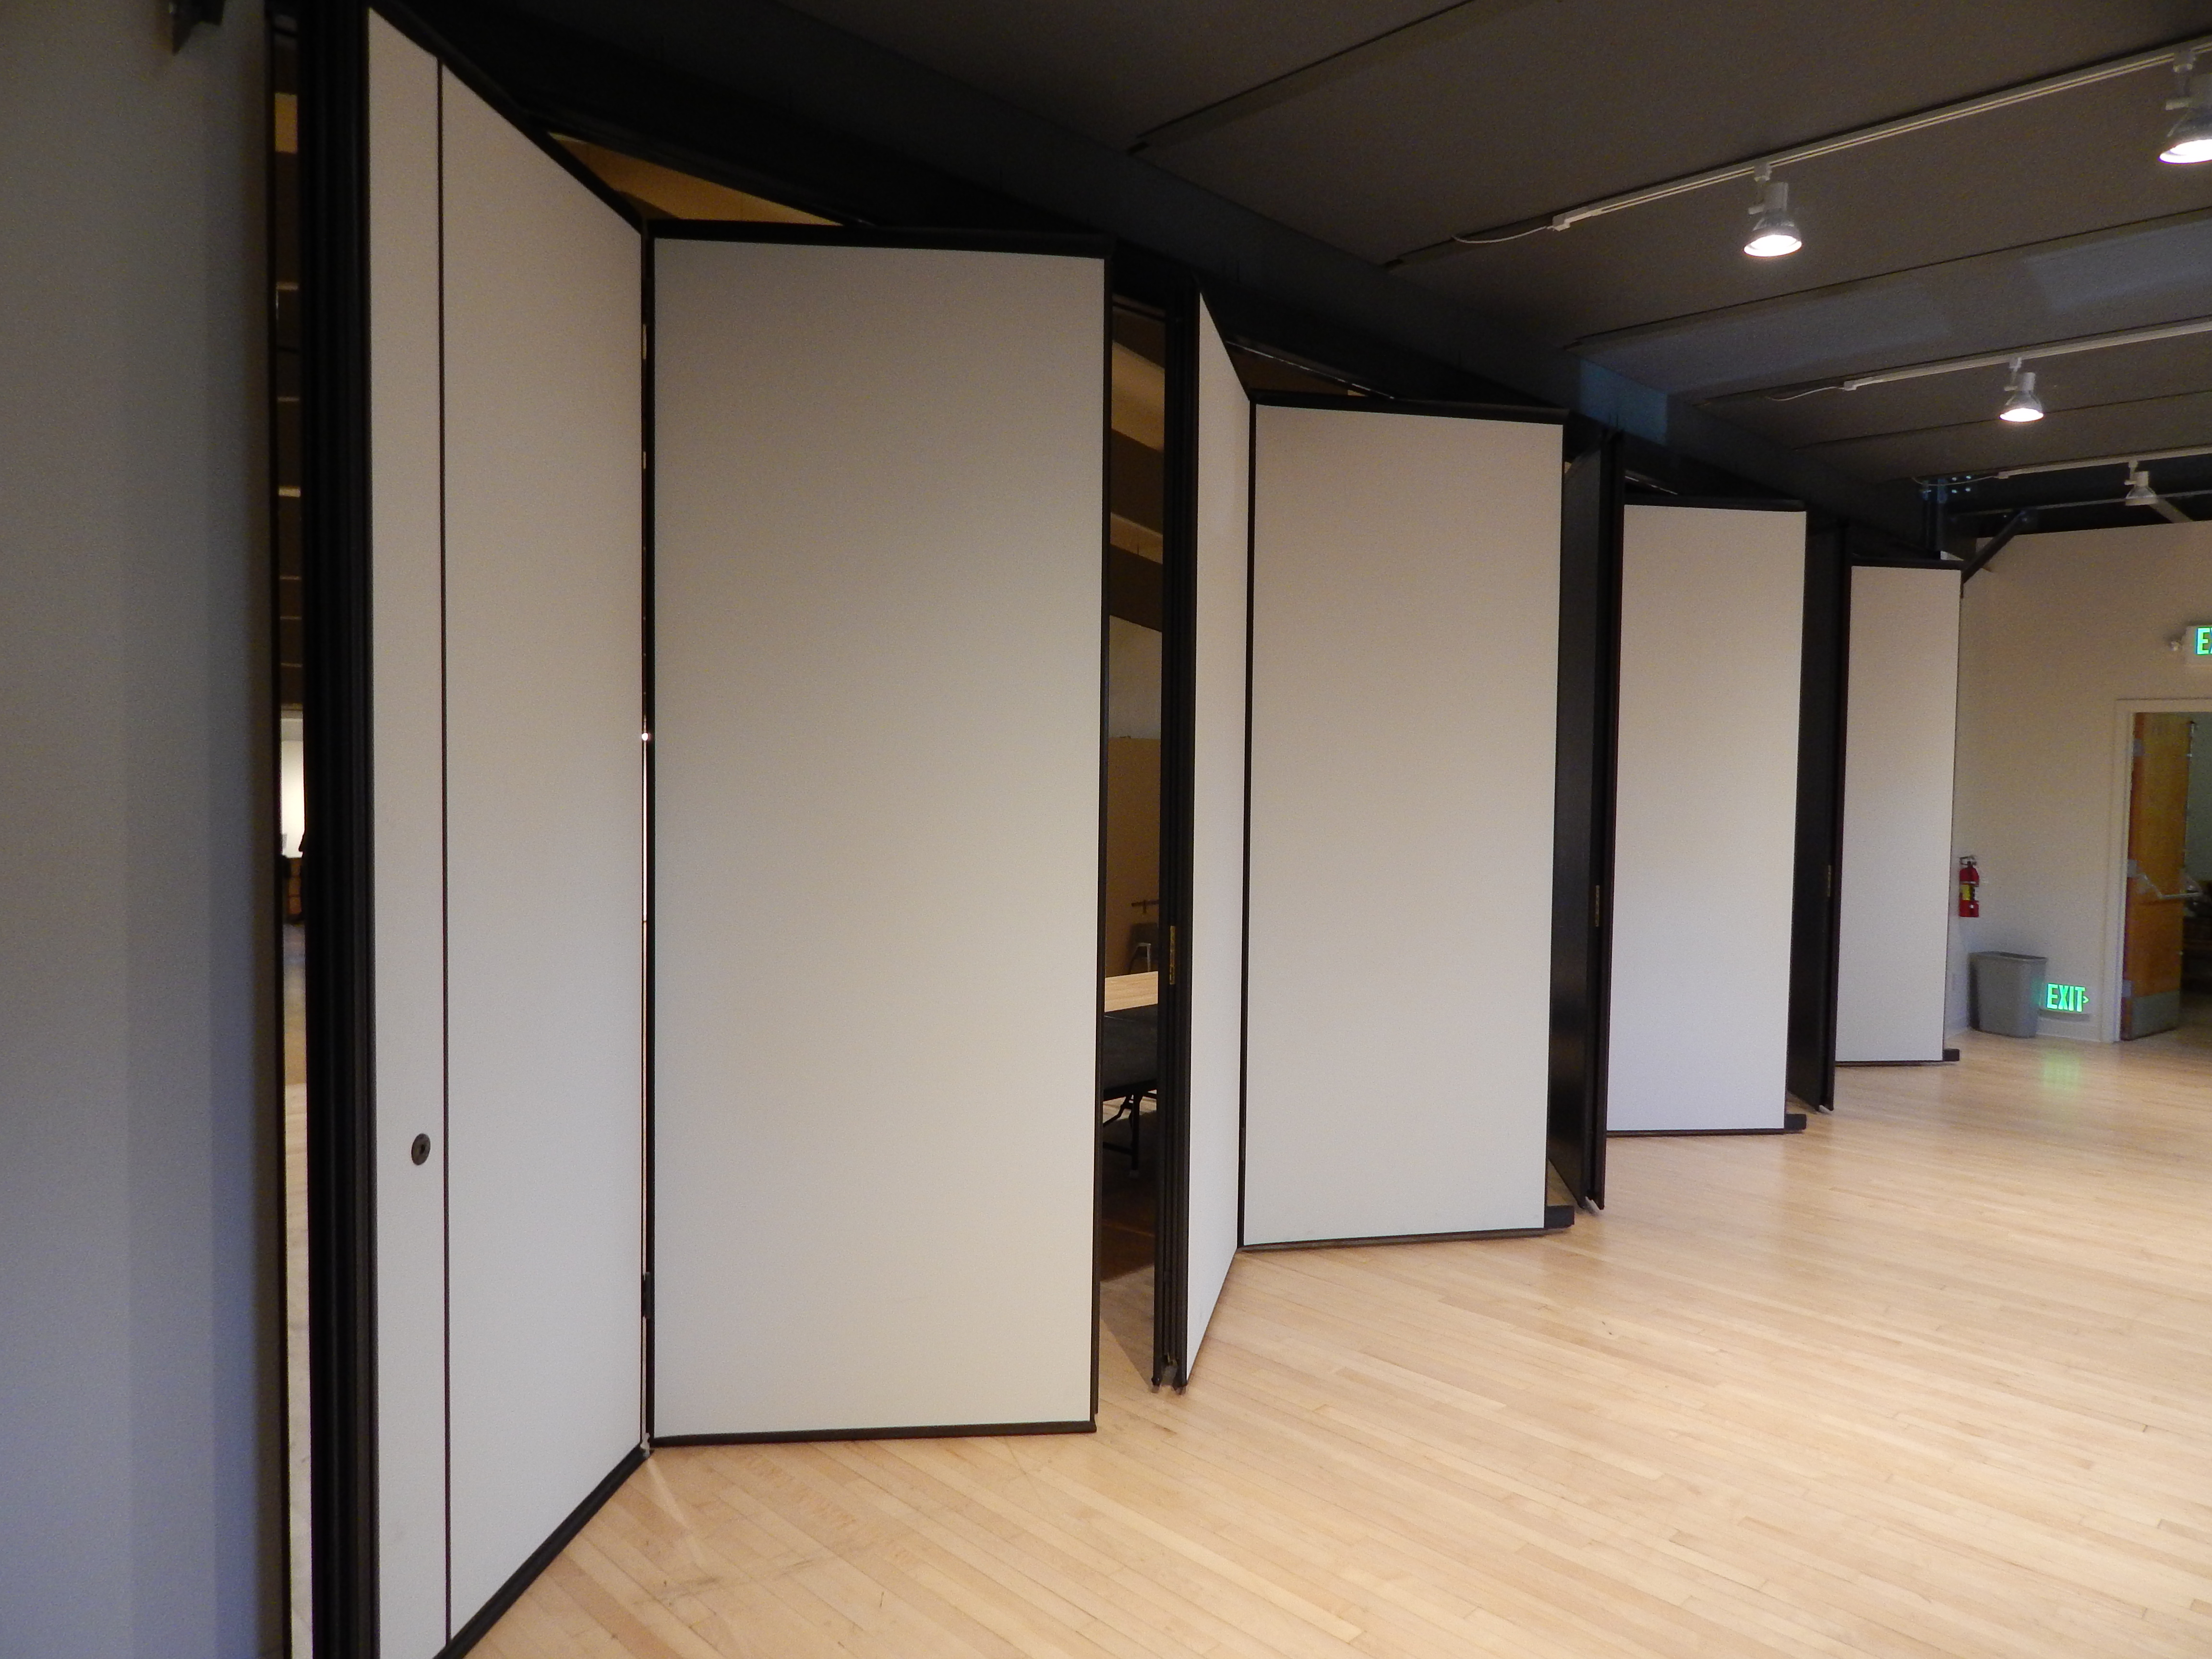 What Makes Panelfold Operable Walls Different?